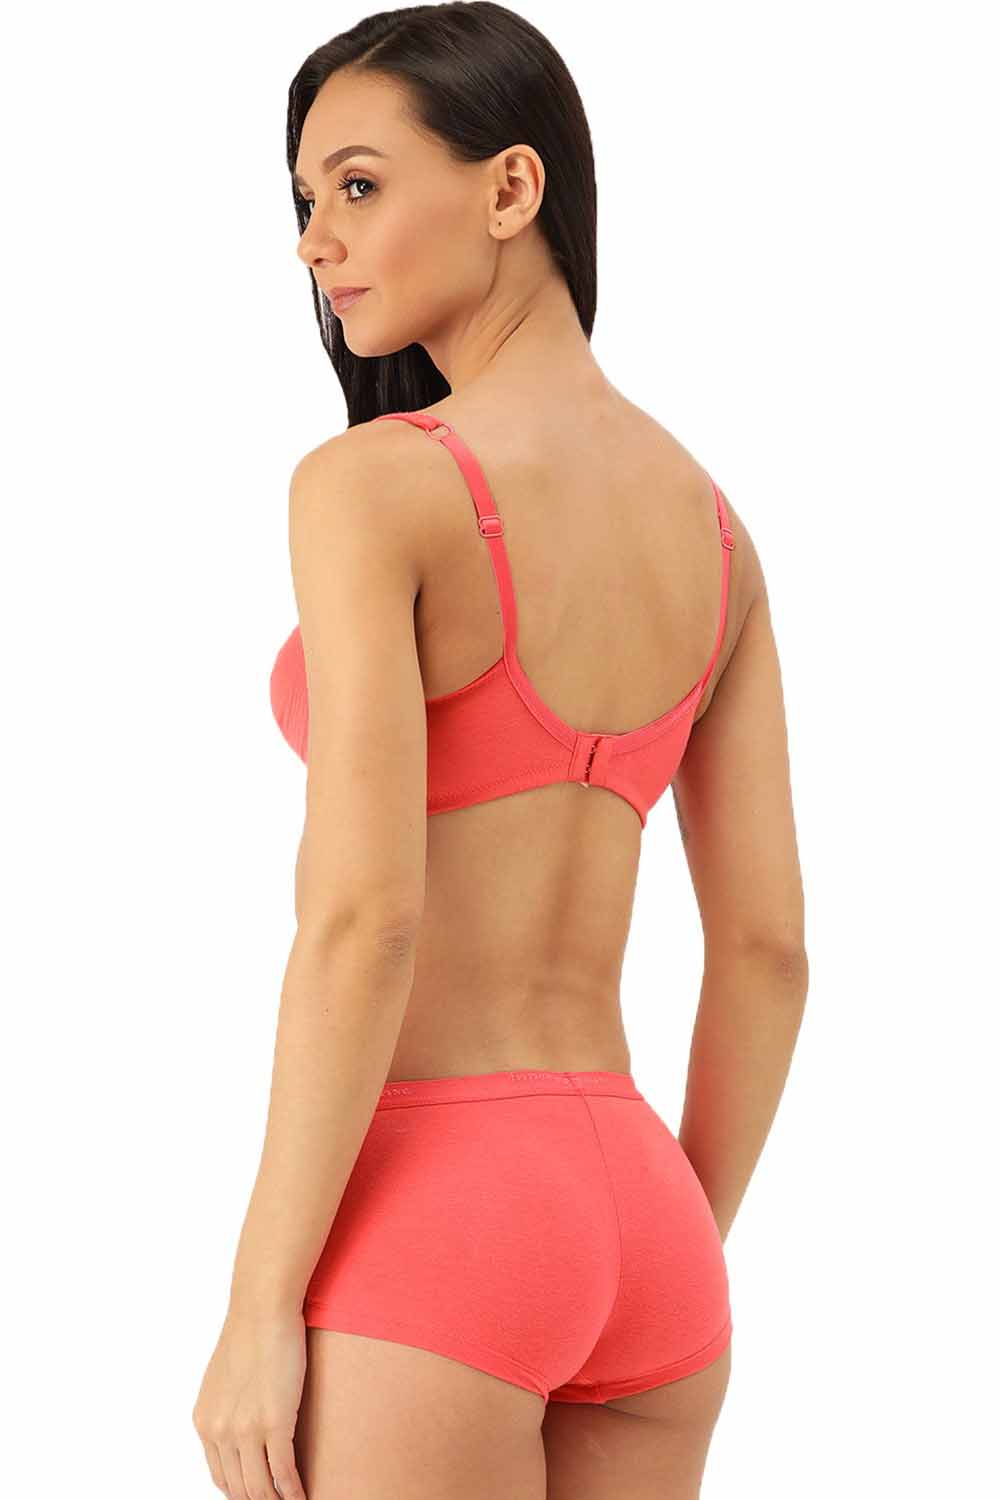 Organic Cotton  Antimicrobial  Seamless Side Support Bra & Panty Set-ISBP057-Bright Pink-